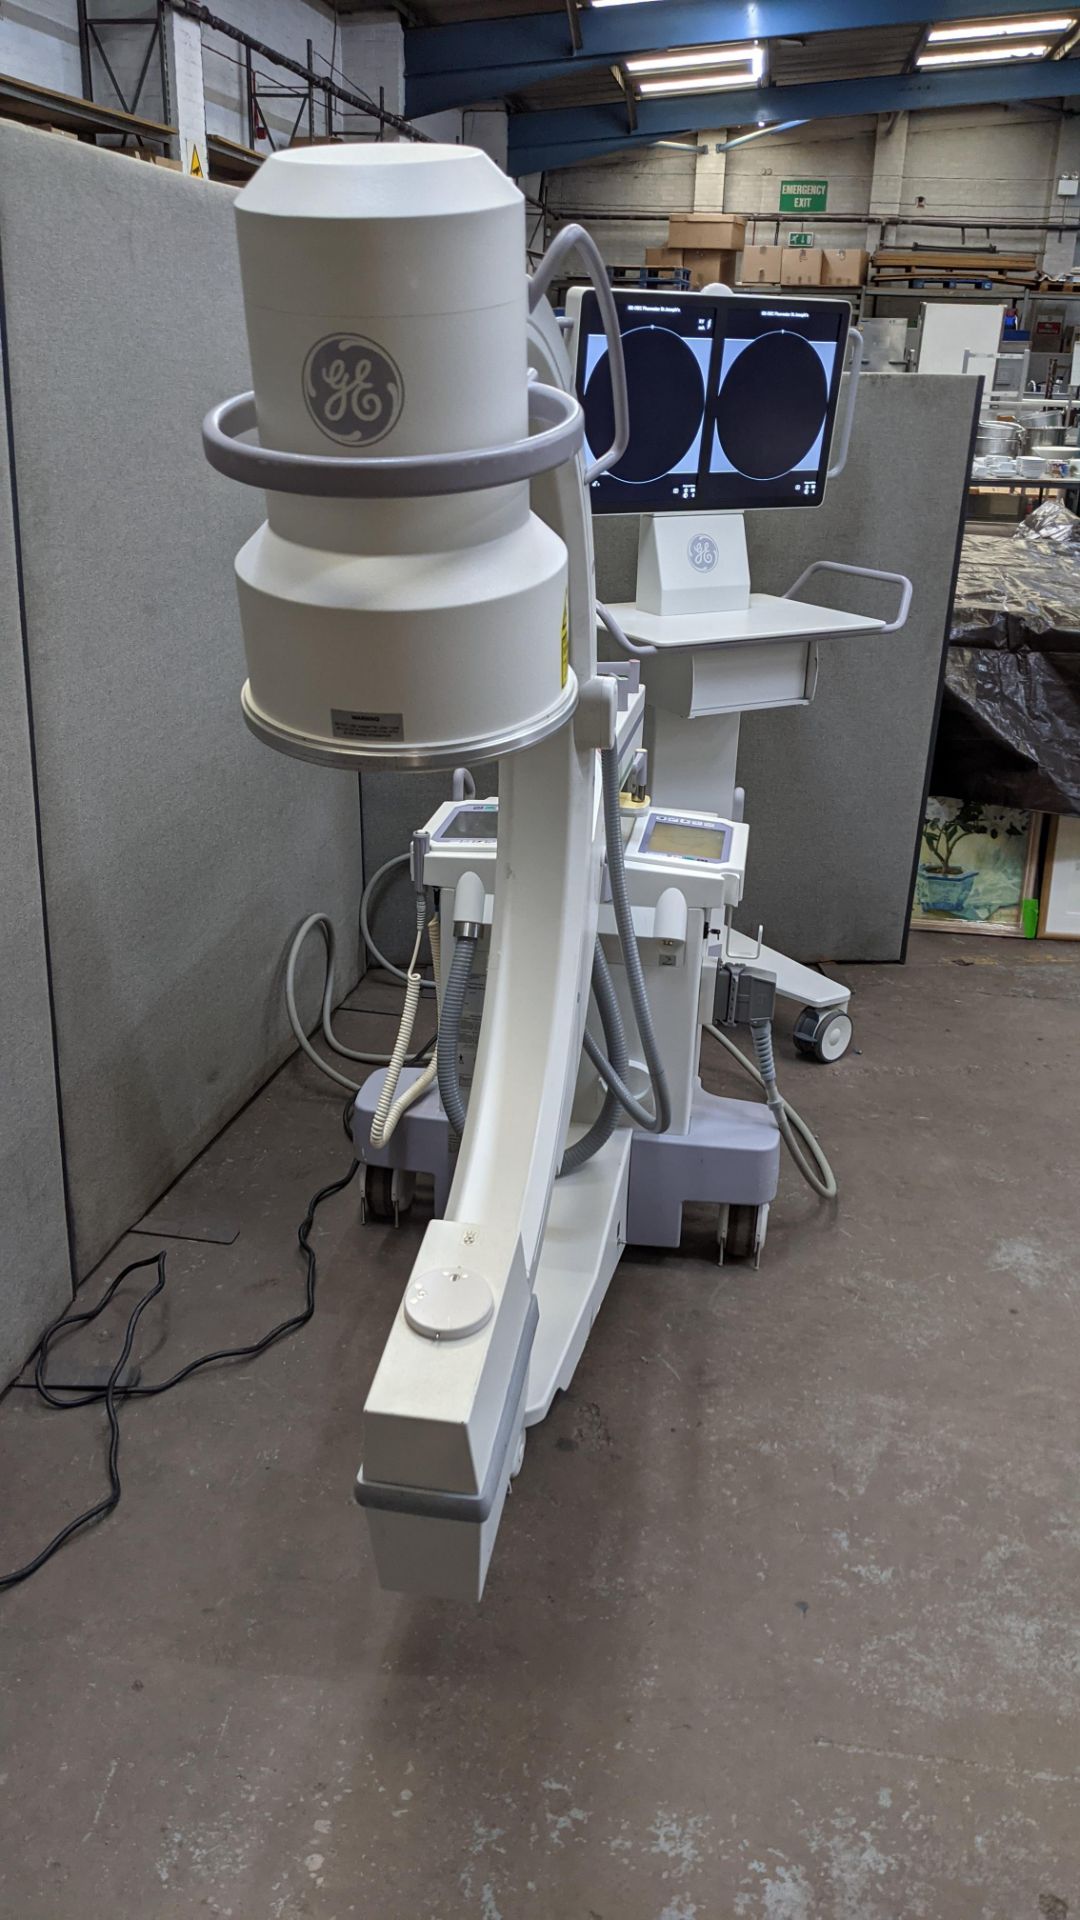 GE-OEC Fluorostar imaging system, purchased new in August 2017. EO4 Series. - Image 9 of 68